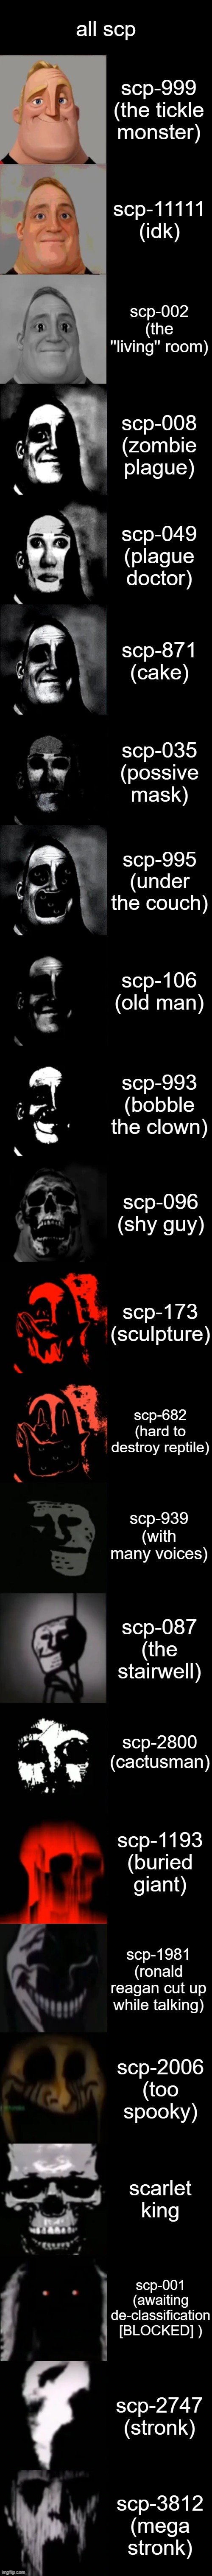 Mr. Incredible Becoming Uncanny Extended HD | all scp; scp-999 (the tickle monster); scp-11111 (idk); scp-002 (the ''living'' room); scp-008 (zombie plague); scp-049 (plague doctor); scp-871 (cake); scp-035 (possive mask); scp-995 (under the couch); scp-106 (old man); scp-993 (bobble the clown); scp-096 (shy guy); scp-173 (sculpture); scp-682 (hard to destroy reptile); scp-939 (with many voices); scp-087 (the stairwell); scp-2800 (cactusman); scp-1193 (buried giant); scp-1981 (ronald reagan cut up while talking); scp-2006 (too spooky); scarlet king; scp-001 (awaiting de-classification [BLOCKED] ); scp-2747 (stronk); scp-3812 (mega stronk) | image tagged in mr incredible becoming uncanny extended hd | made w/ Imgflip meme maker